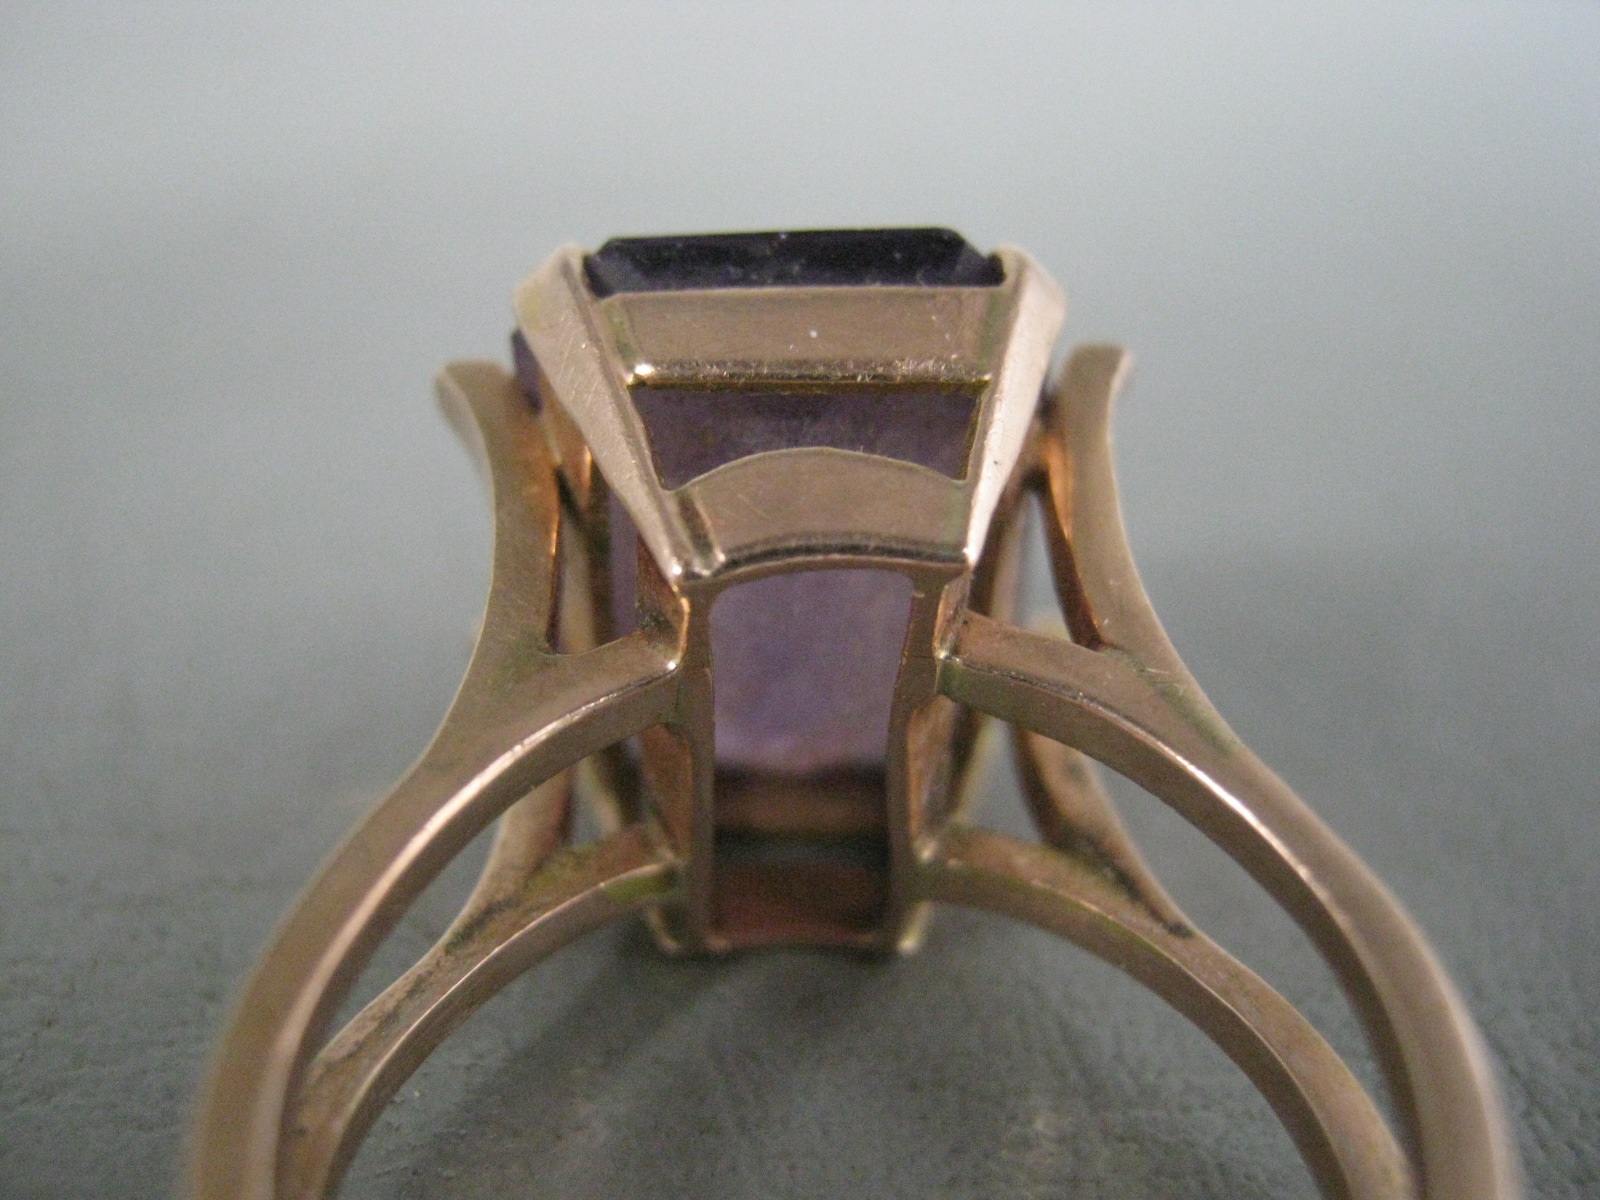 Vintage Antique Amethyst Ring Size 8.25 Estate Jewelry Rose Gold? No Reserve! 11